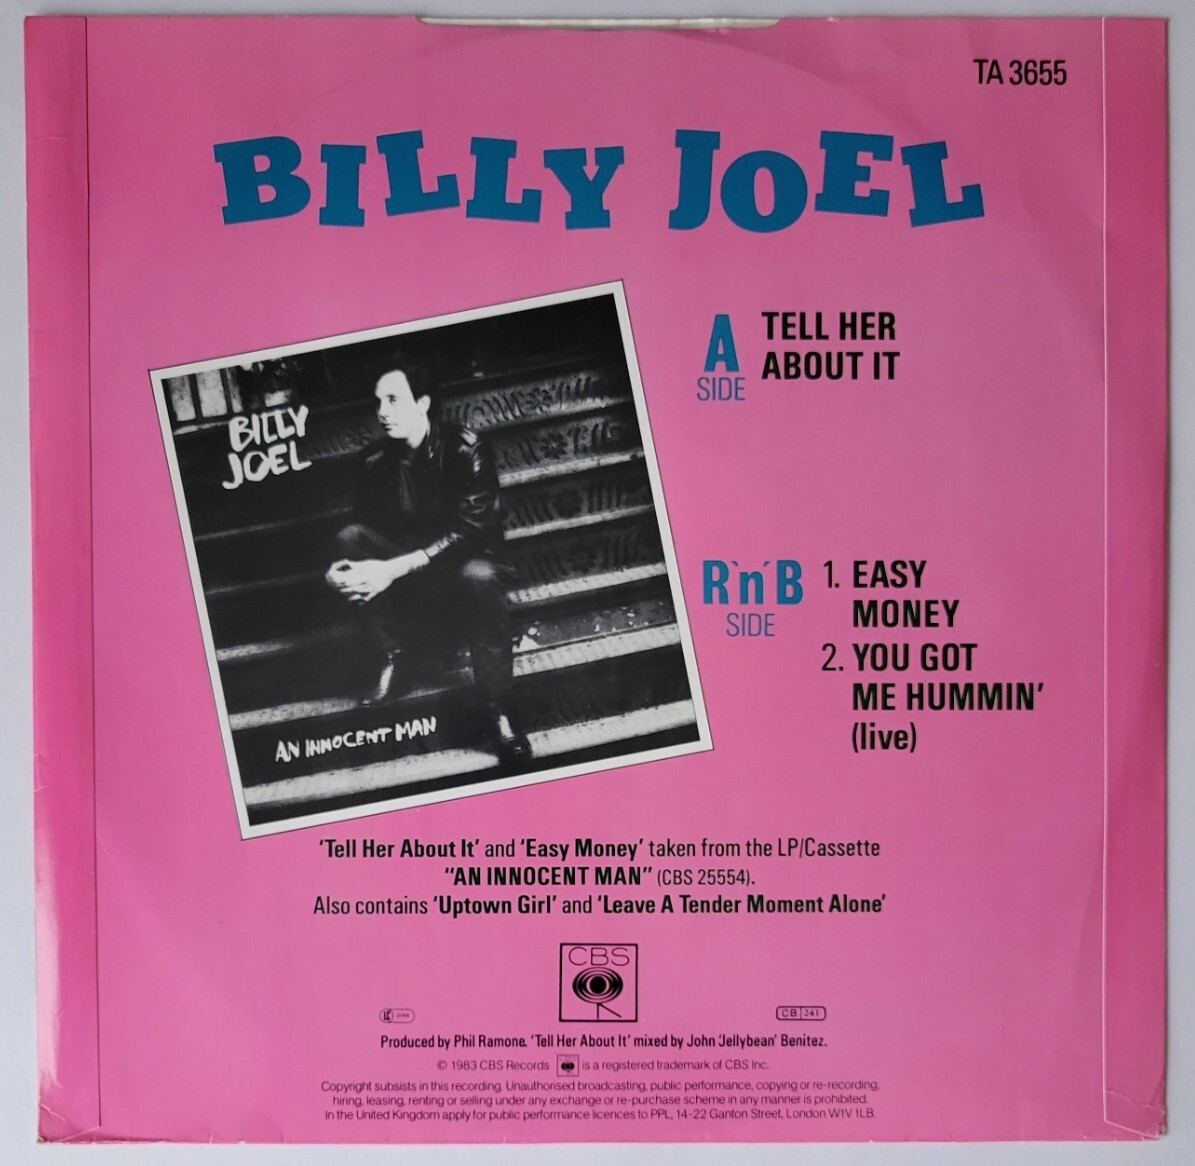 BILLY JOEL CD 12inch STAR BOX TELL HER ABOUT IT LEAVE A TENDER MOMENT ALONE ビリー・ジョエル AN INNOCENT MAN MOVING OUT BIG SHOT_画像4